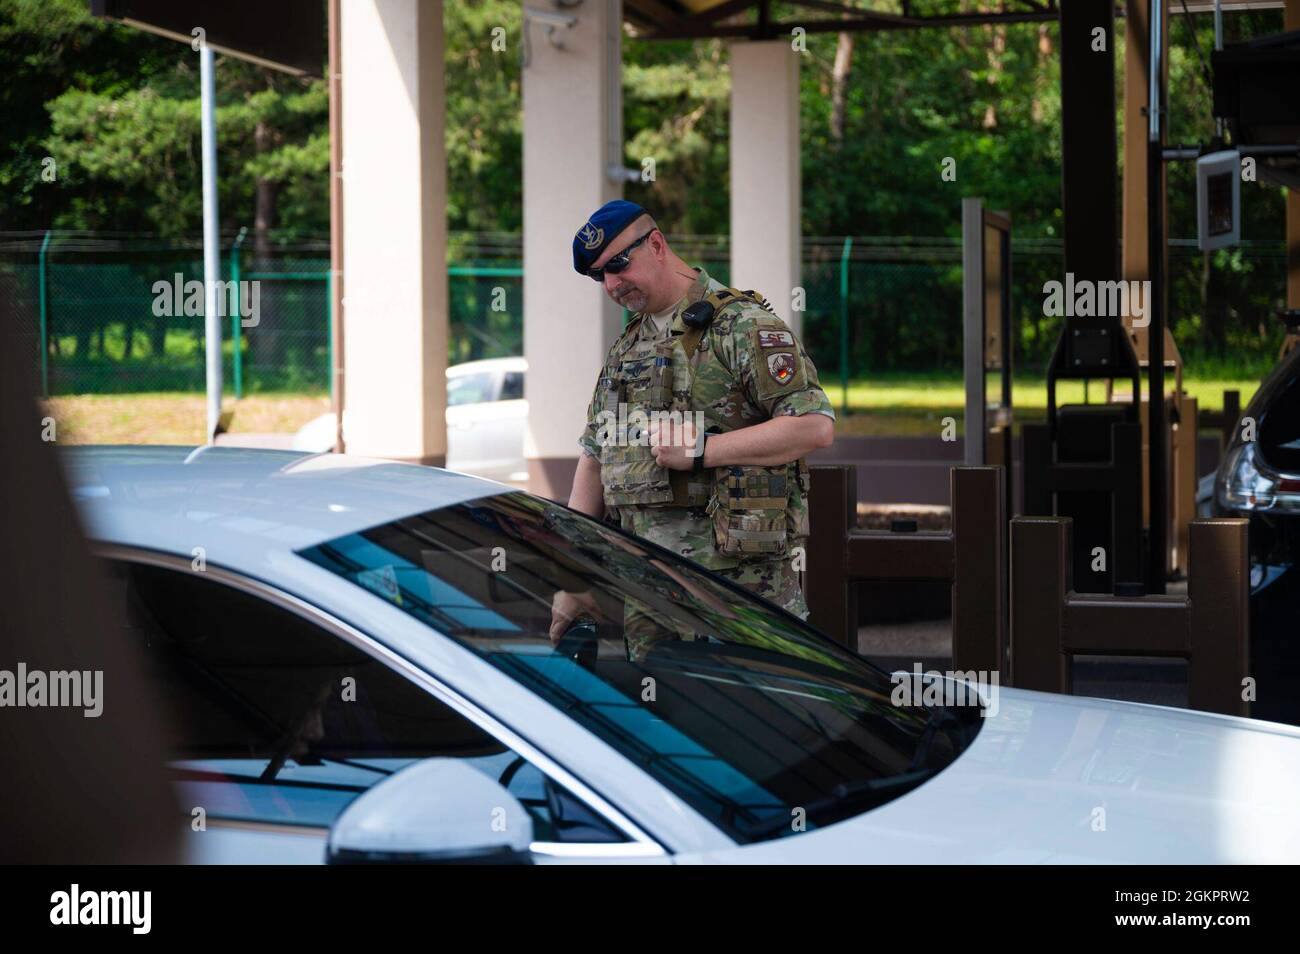 A patrolman assigned to the 86th Security Forces Squadron conducts a security check of vehicles entering Ramstein Air Base, Germany, June 15, 2021. Members assigned to the 86 SFS keep Ramstein entry and exit points secure while ensuring every person has correct identification. Stock Photo